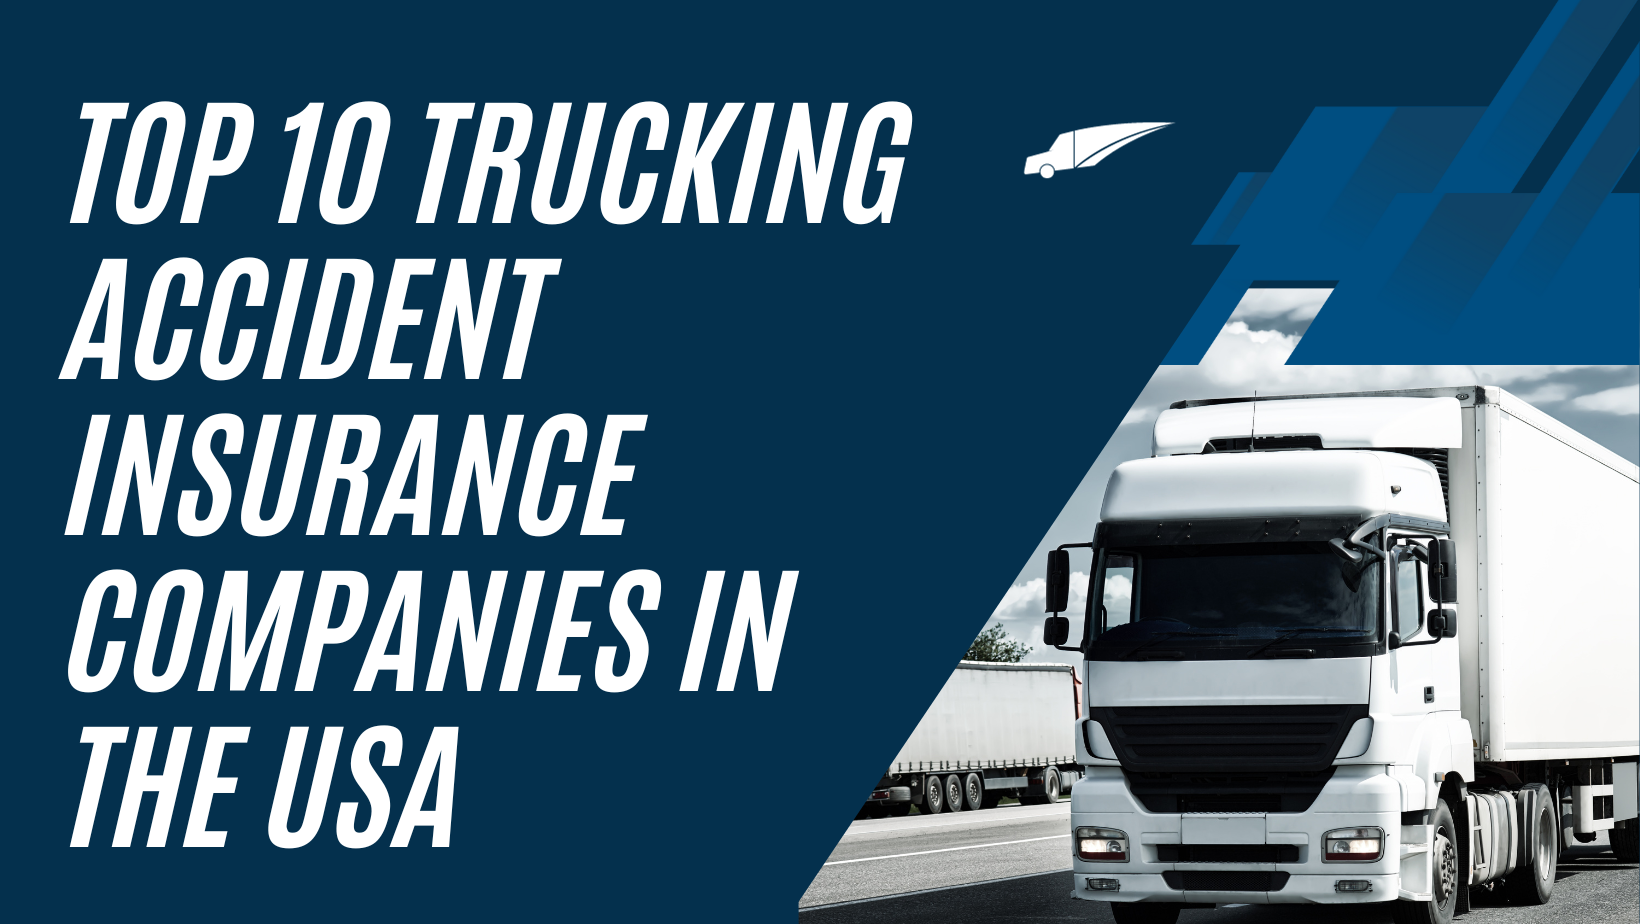 A Comprehensive Guide to the Top 10 Trucking Accident Insurance Companies in the USA